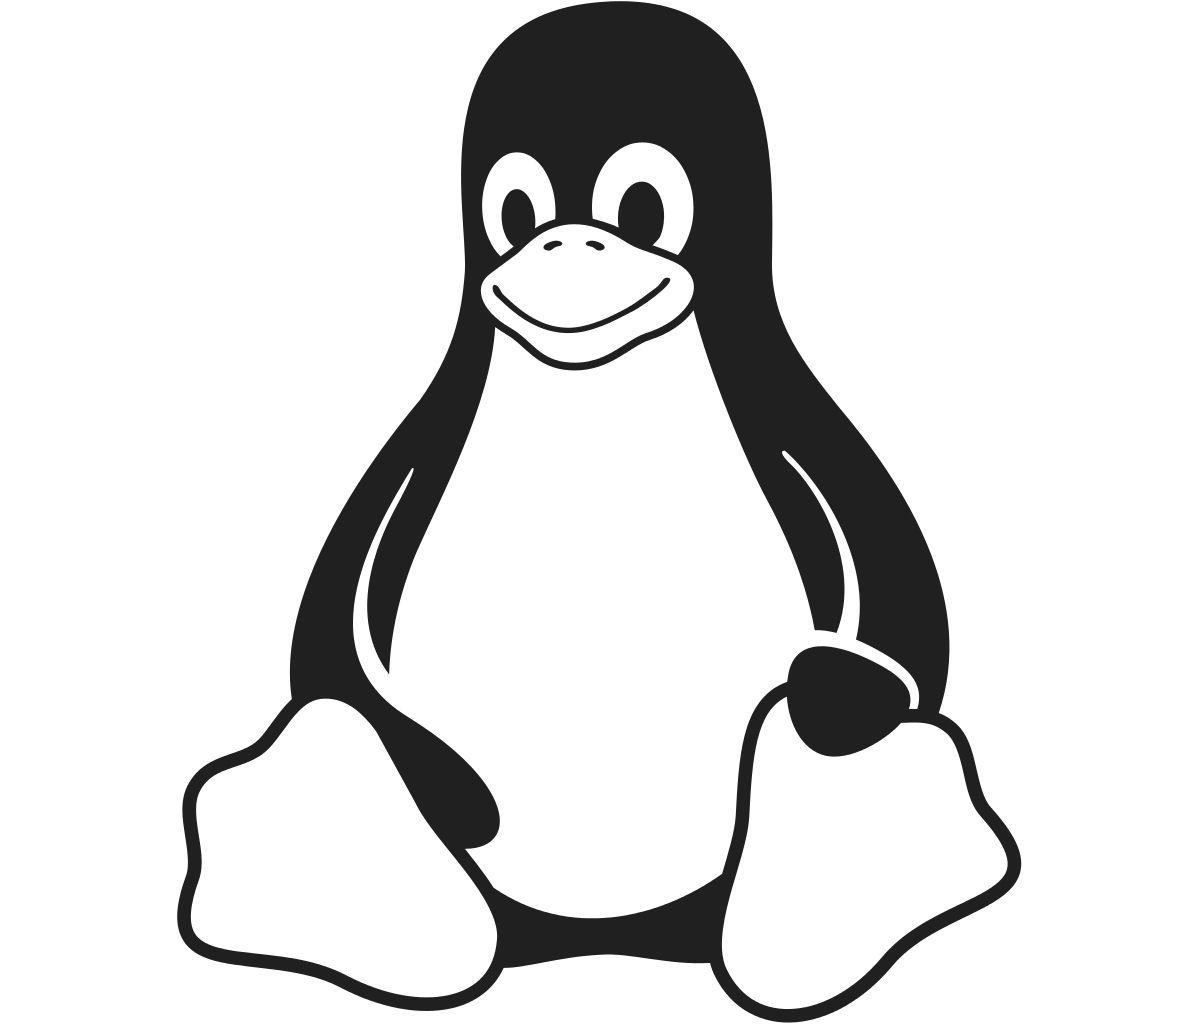 Linux Logo - Linux Logo, Linux Symbol Meaning, History and Evolution